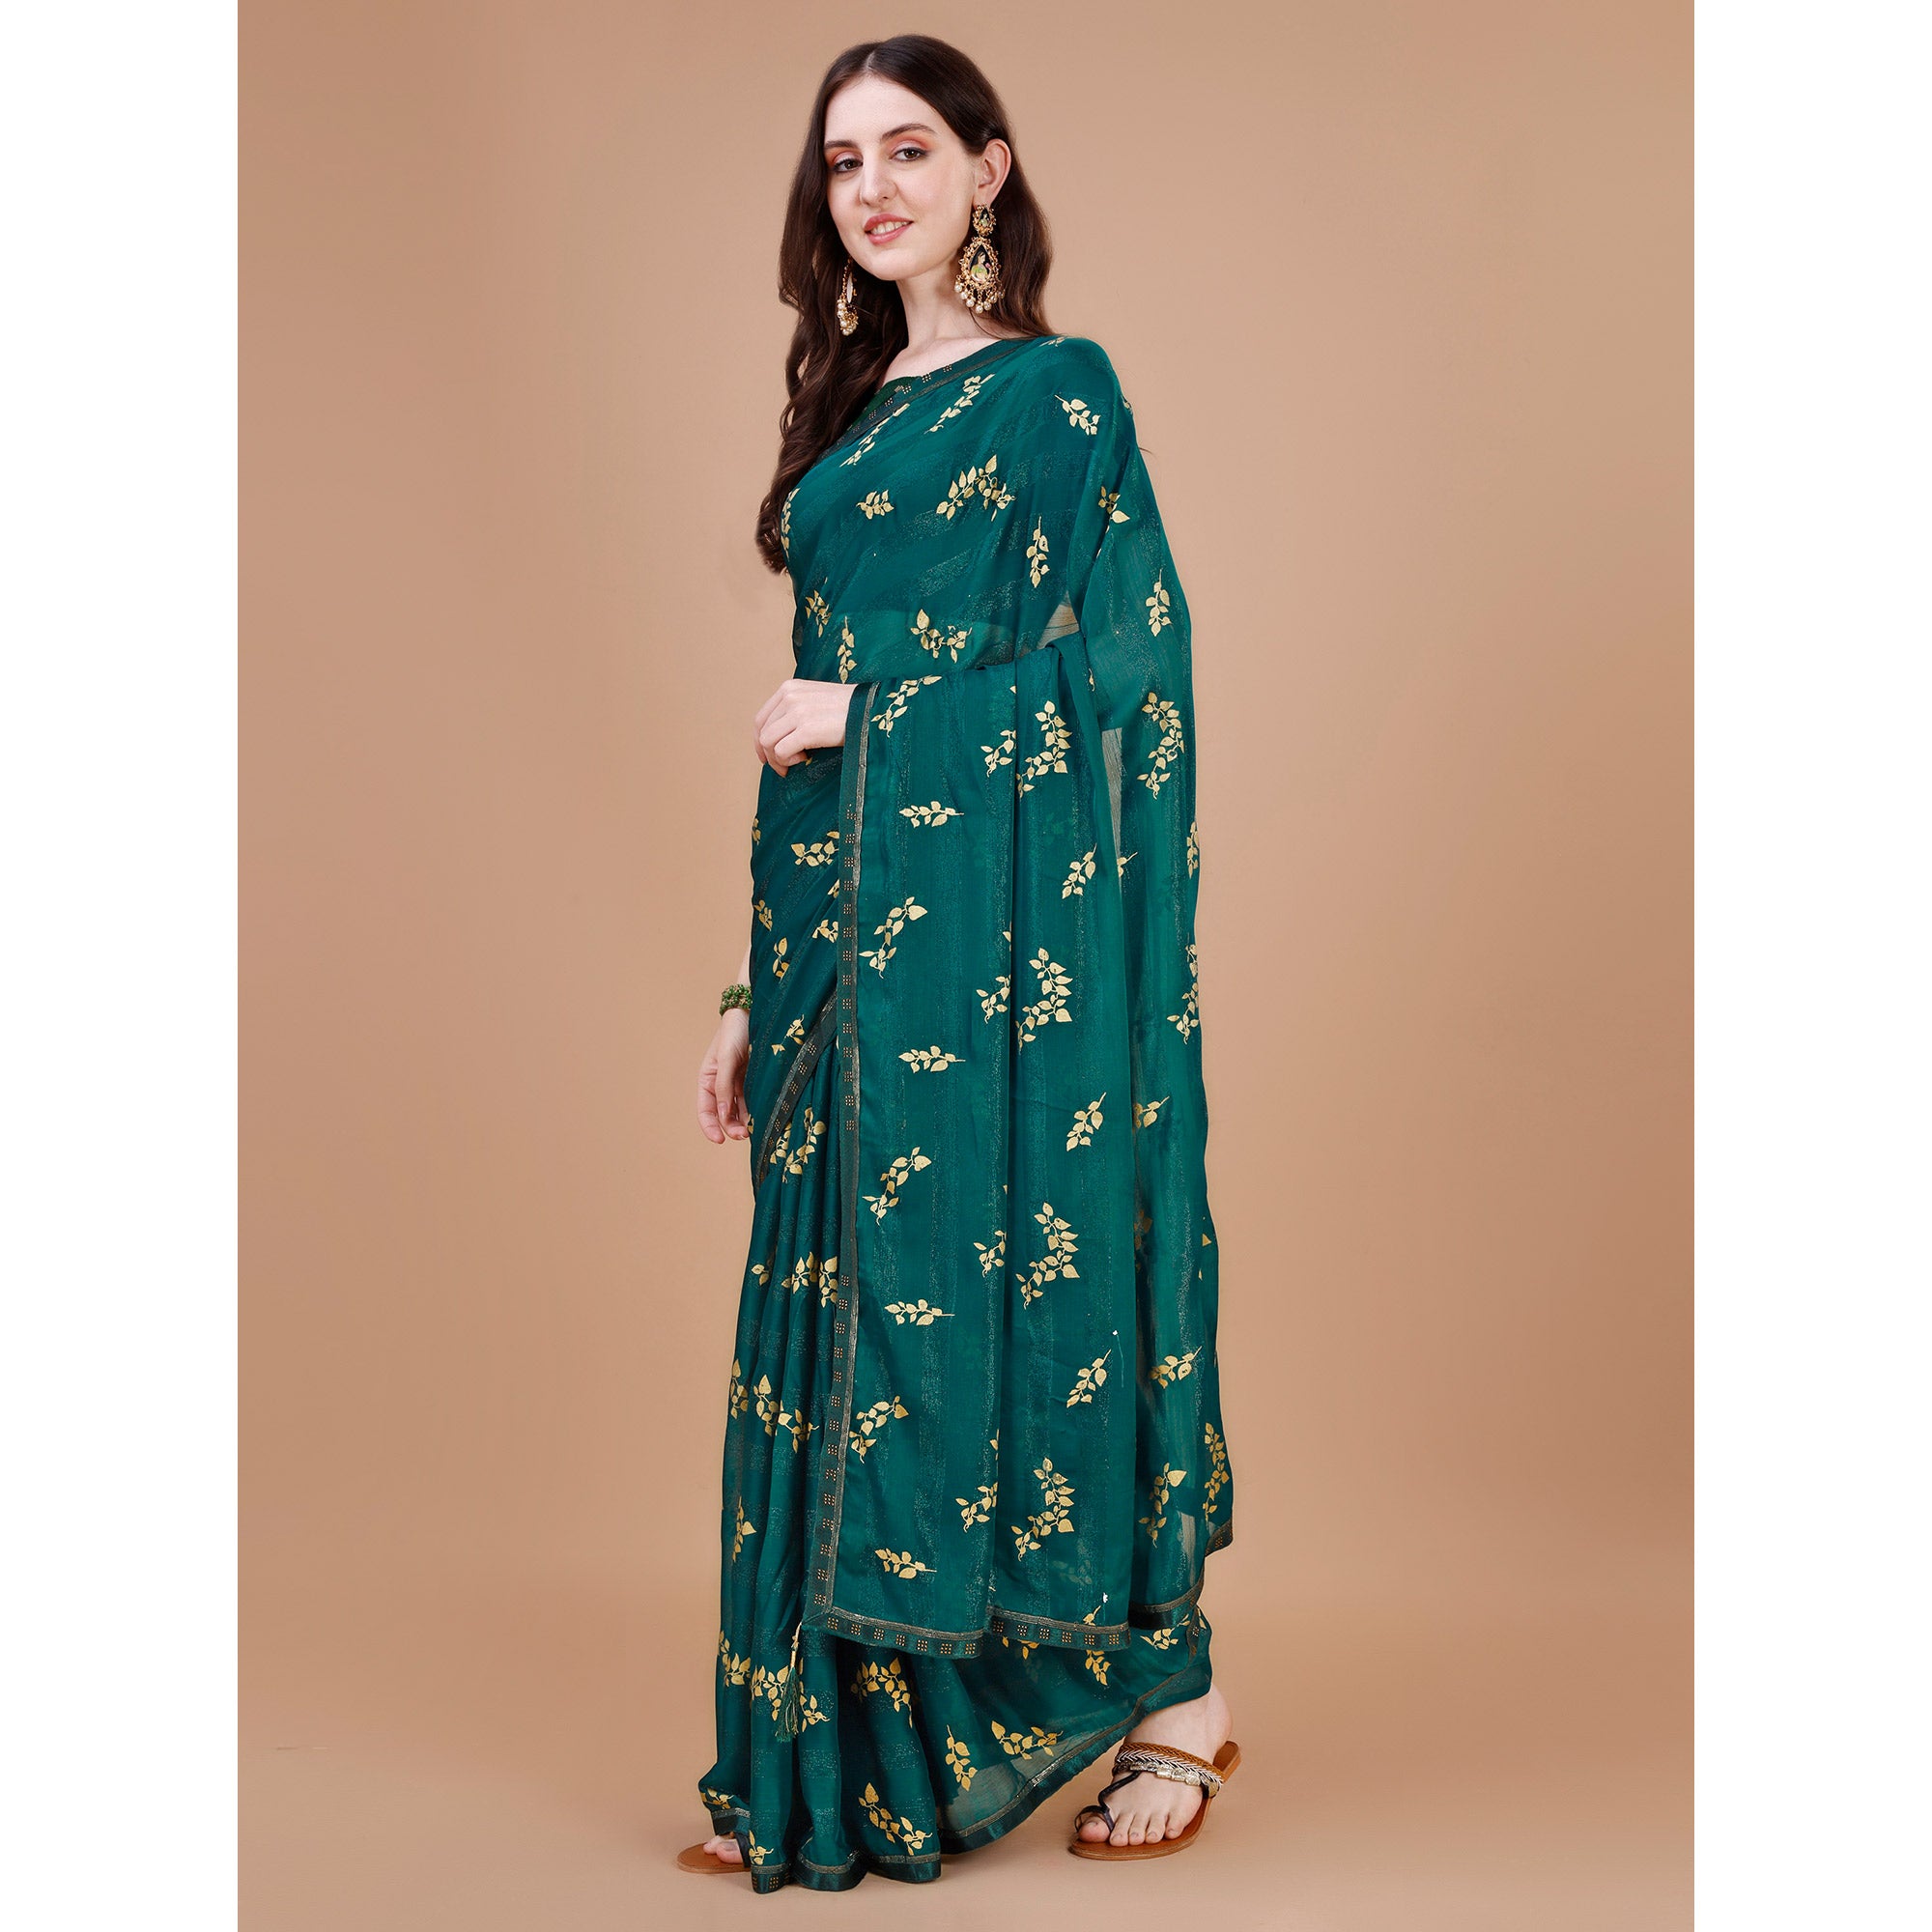 Green Foil Printed Chiffon Saree With Lace Border